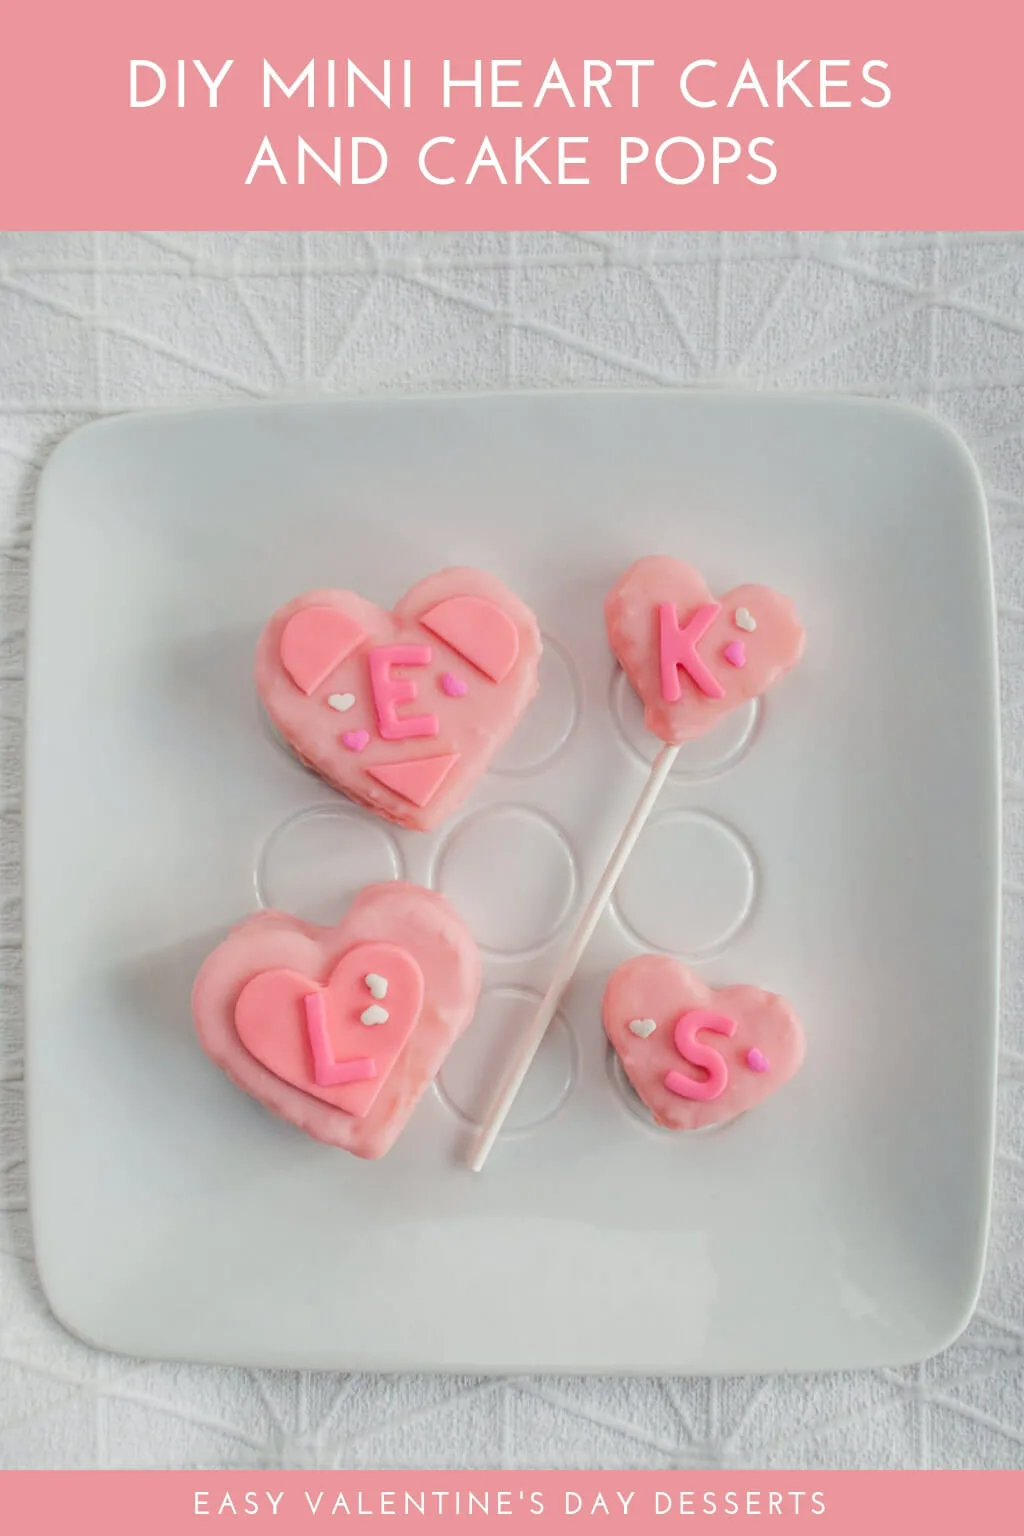 DIY mini heart cakes and heart cake pops with monograms